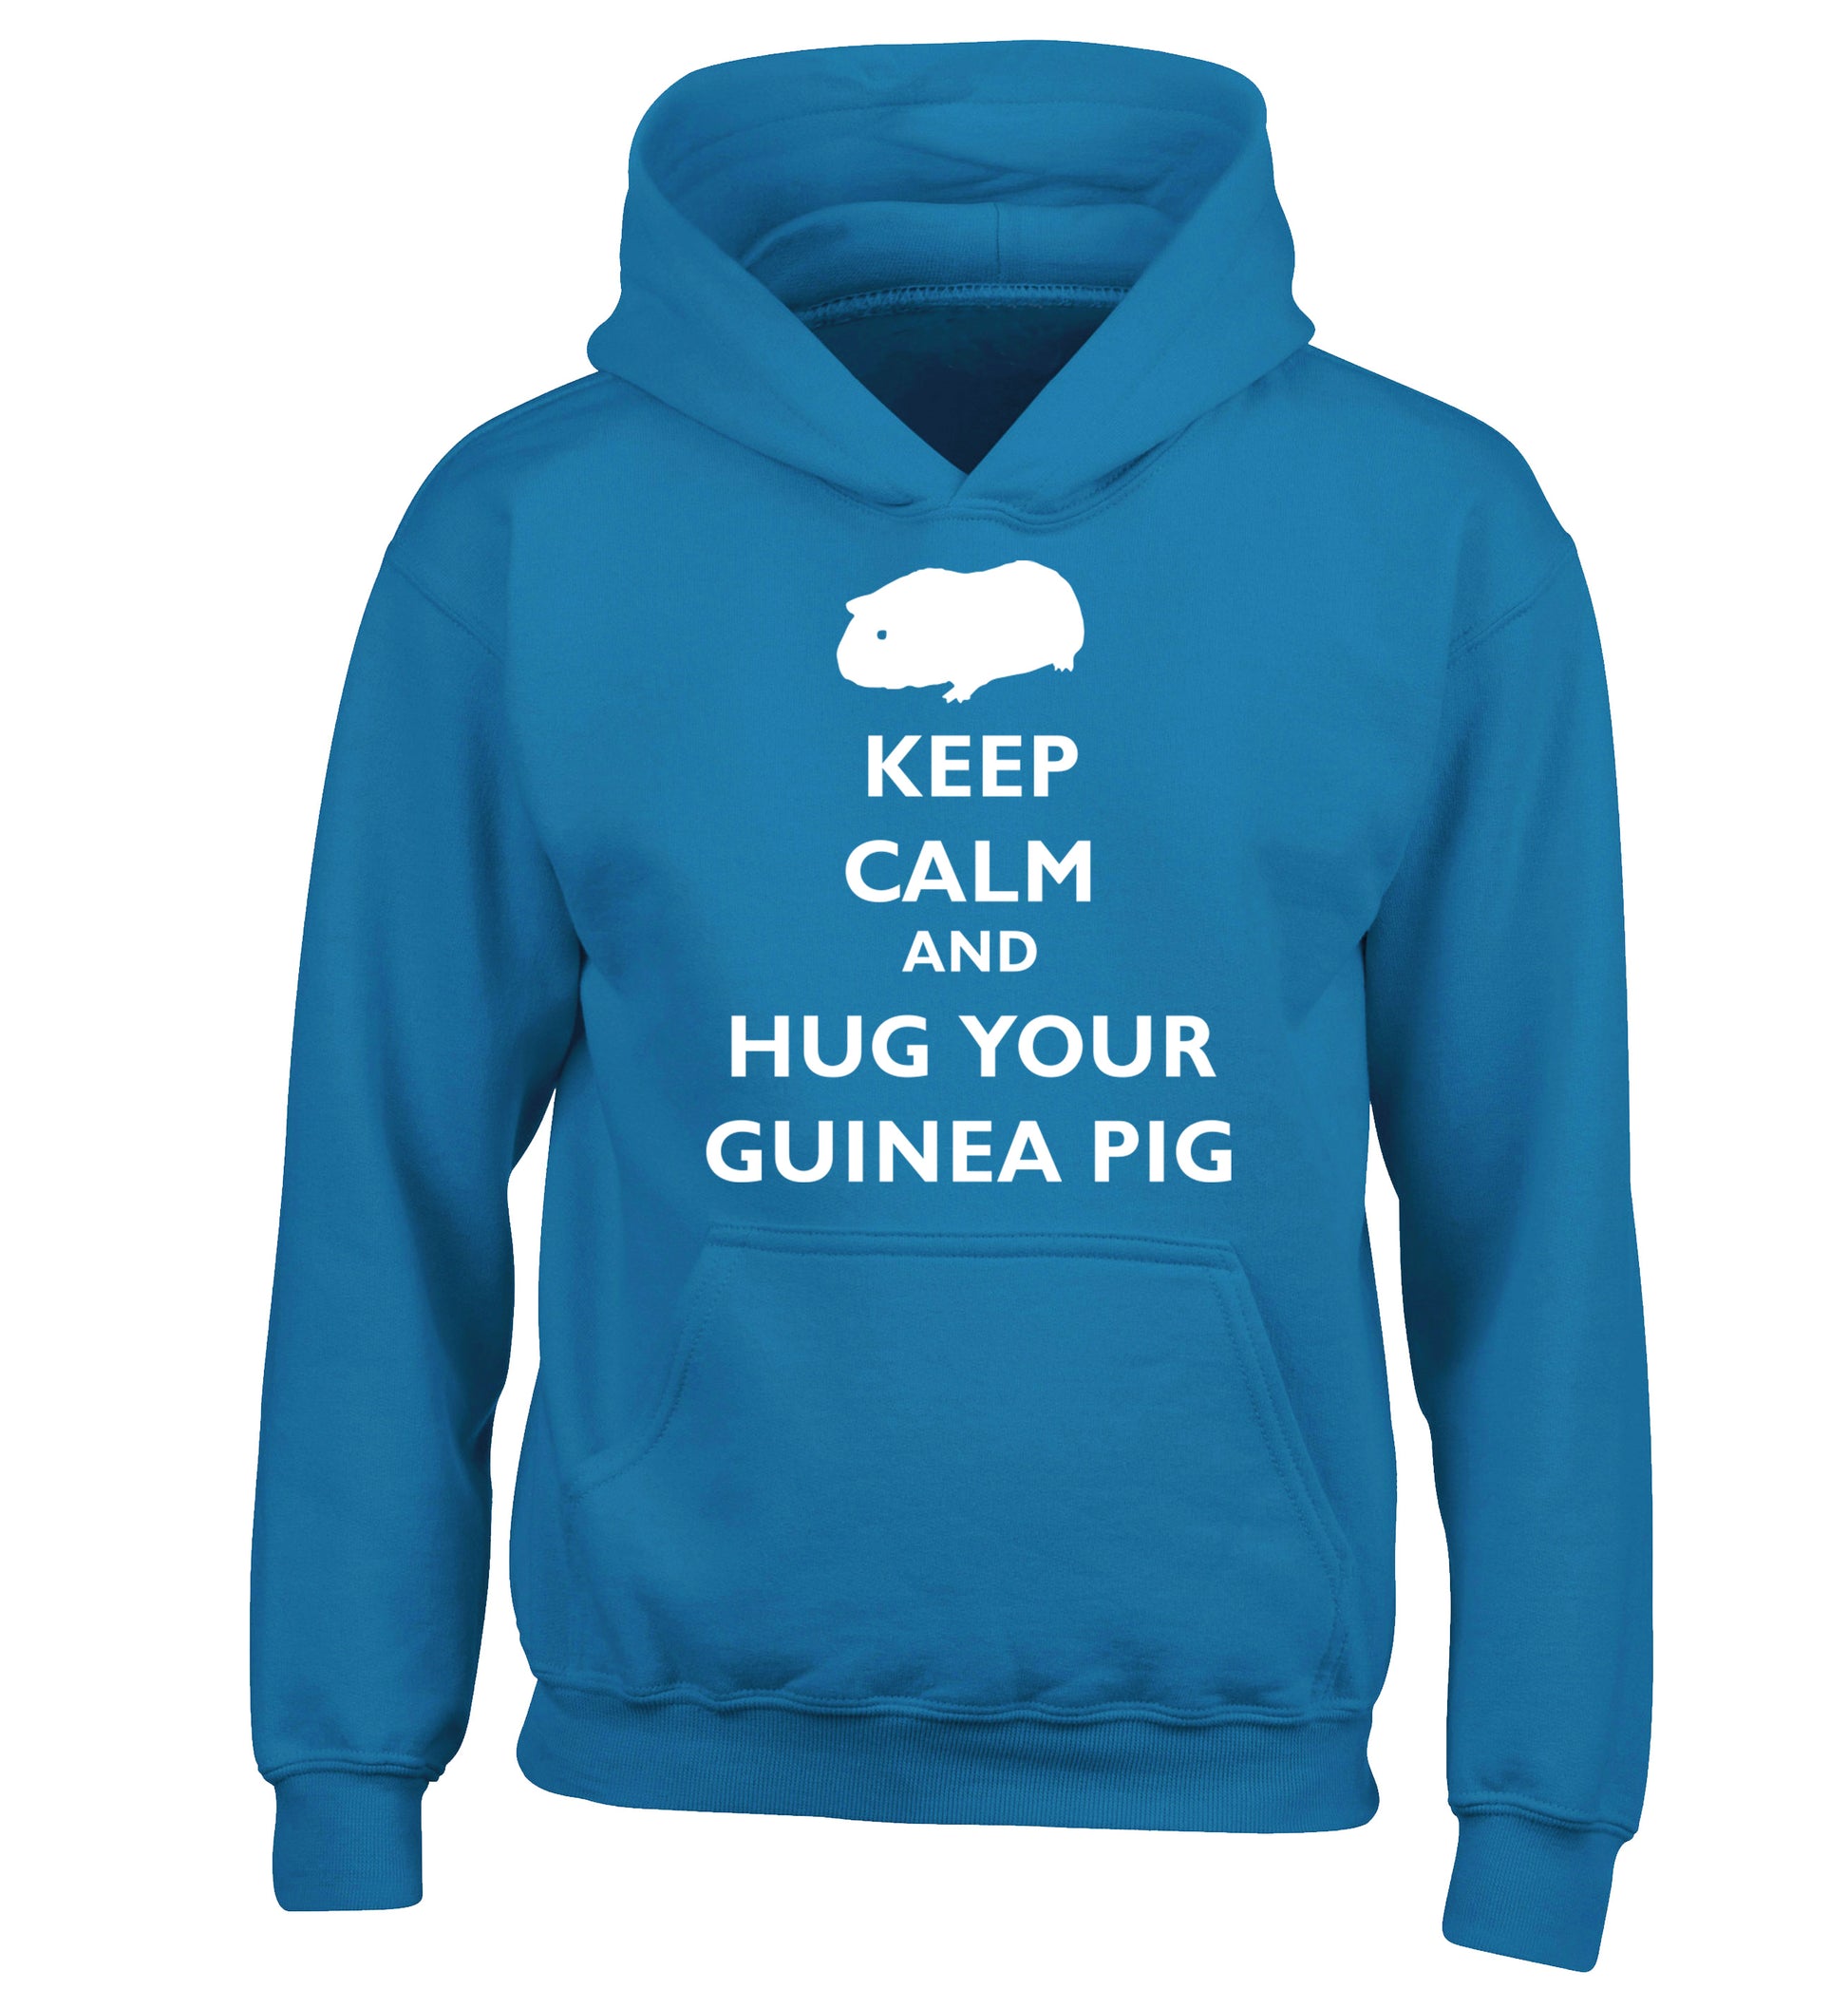 Keep calm and hug your guineapig children's blue hoodie 12-13 Years